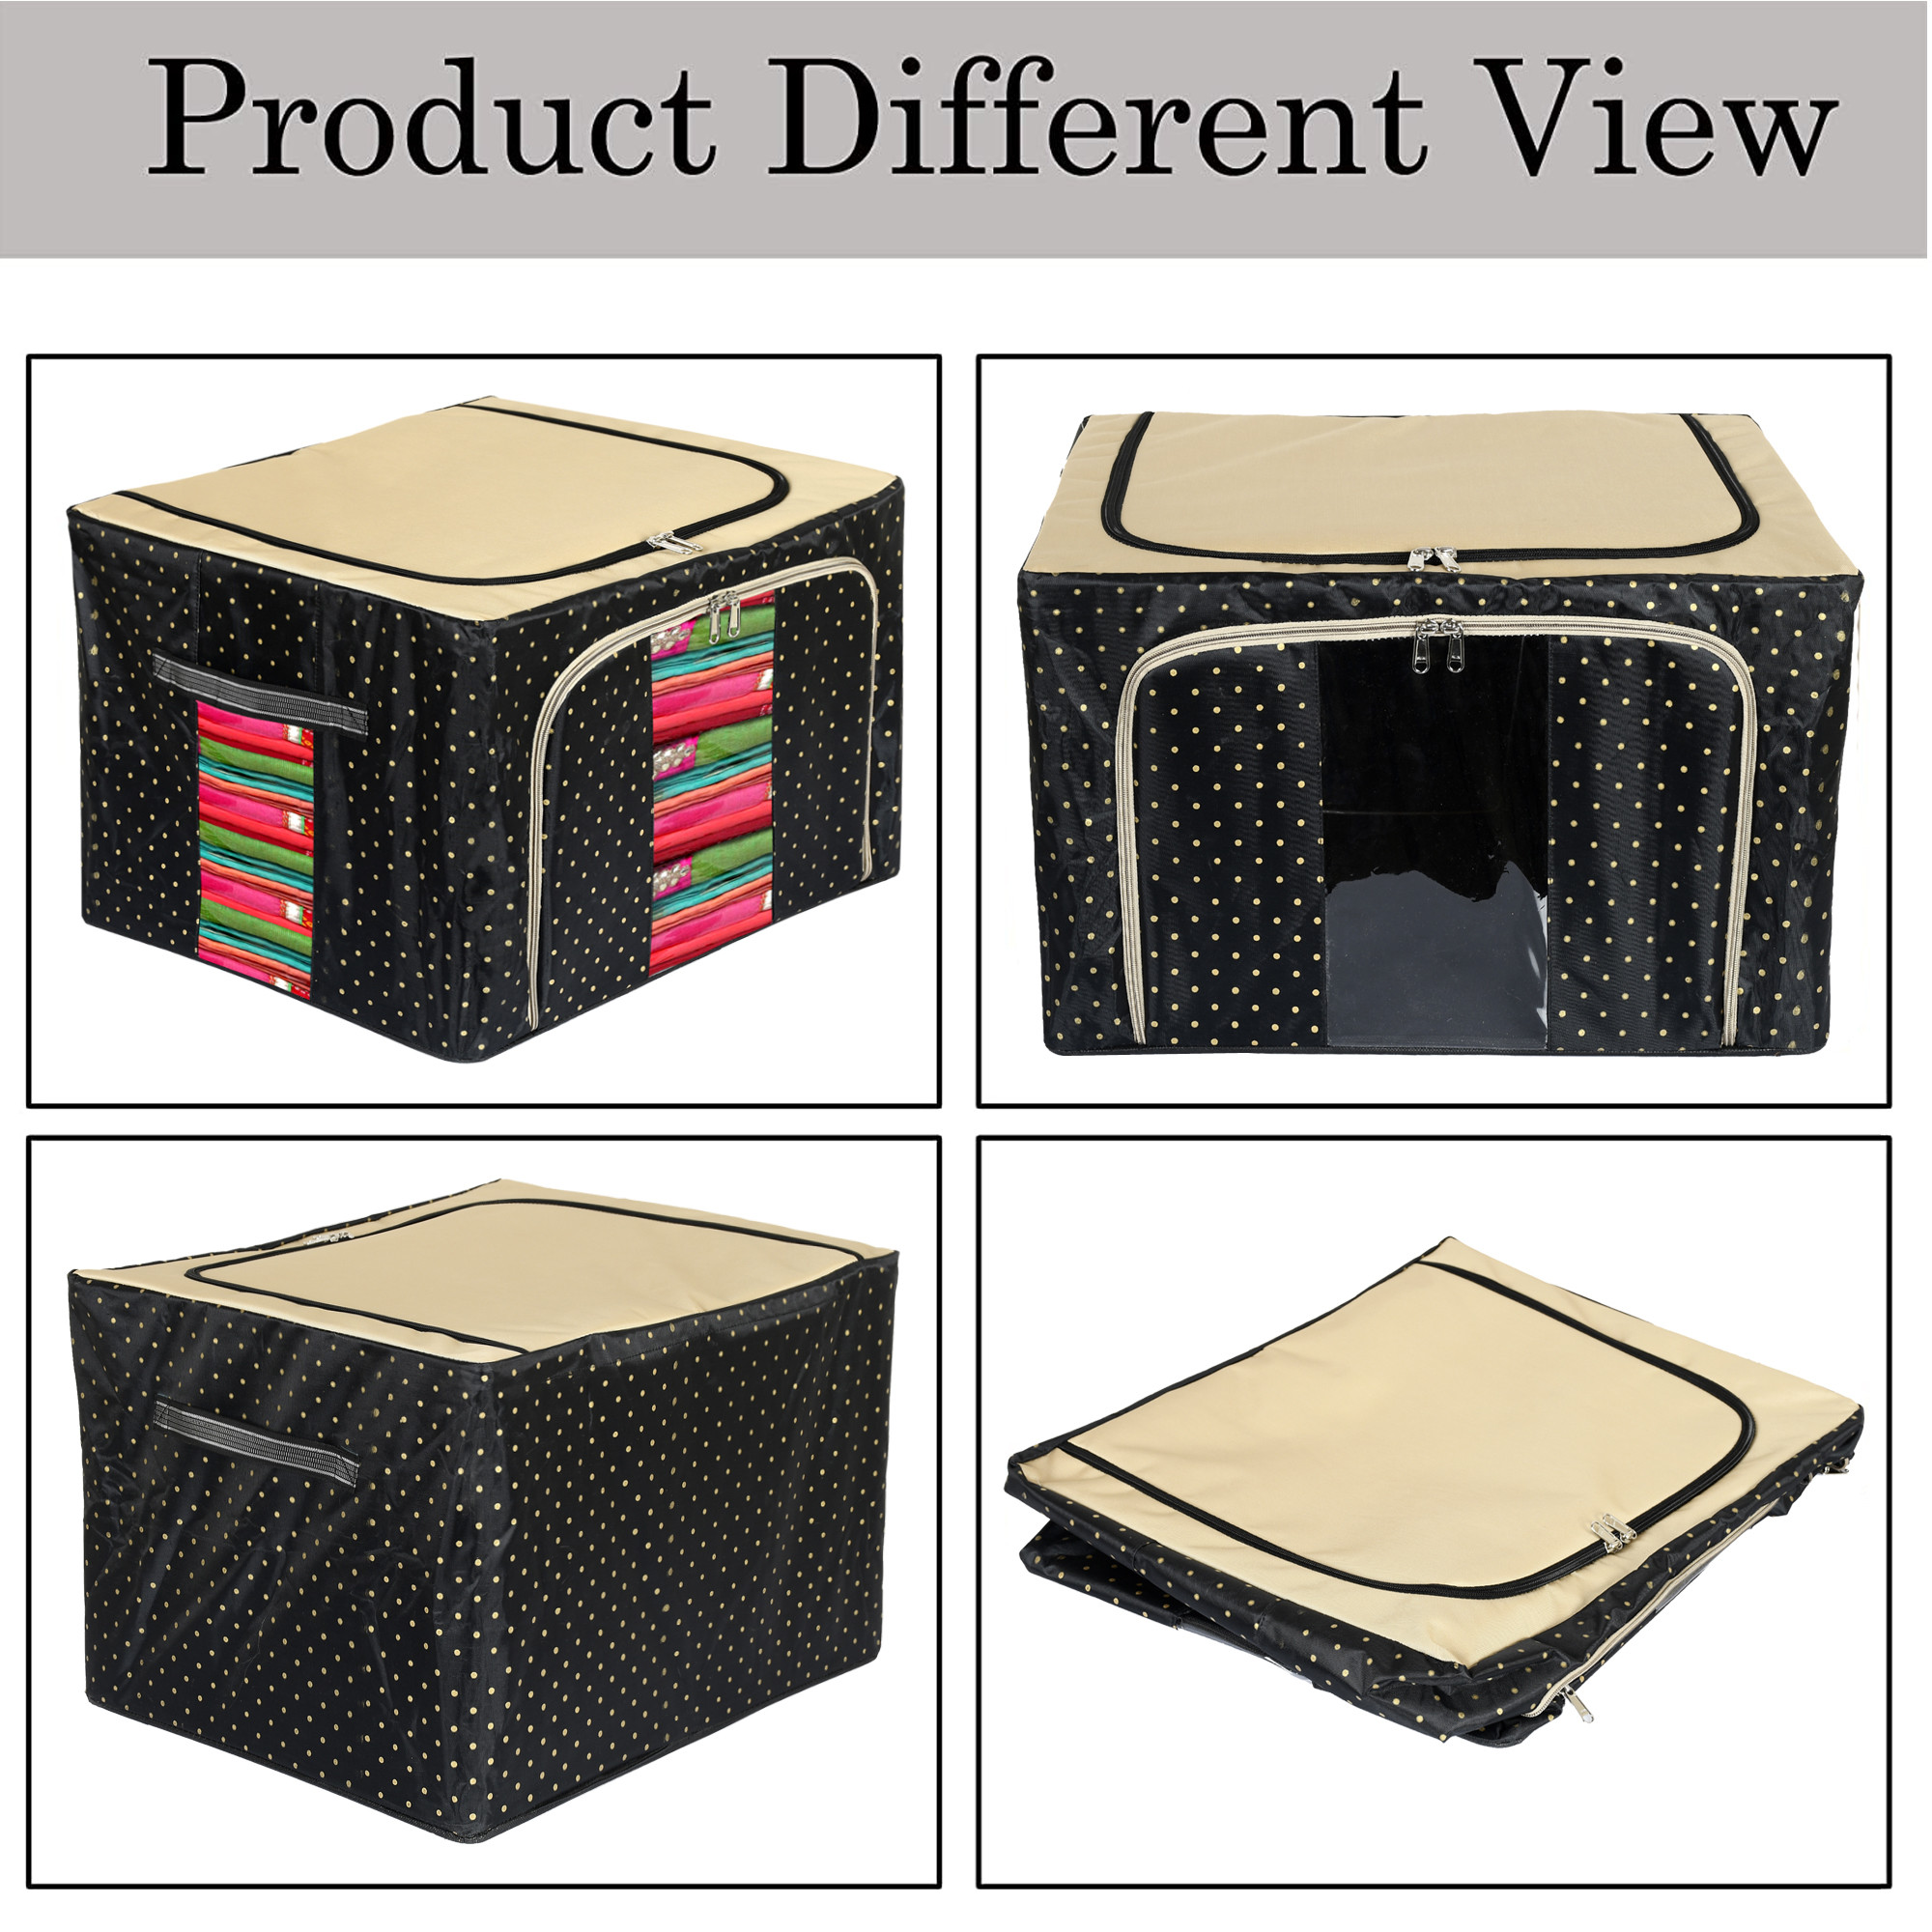 Kuber Industries Dot Printed Steel Frame Storage Box/Organizer For Clothing, Blankets, Bedding With Clear Window, 24Ltr. (Black & Grey)-44KM0221